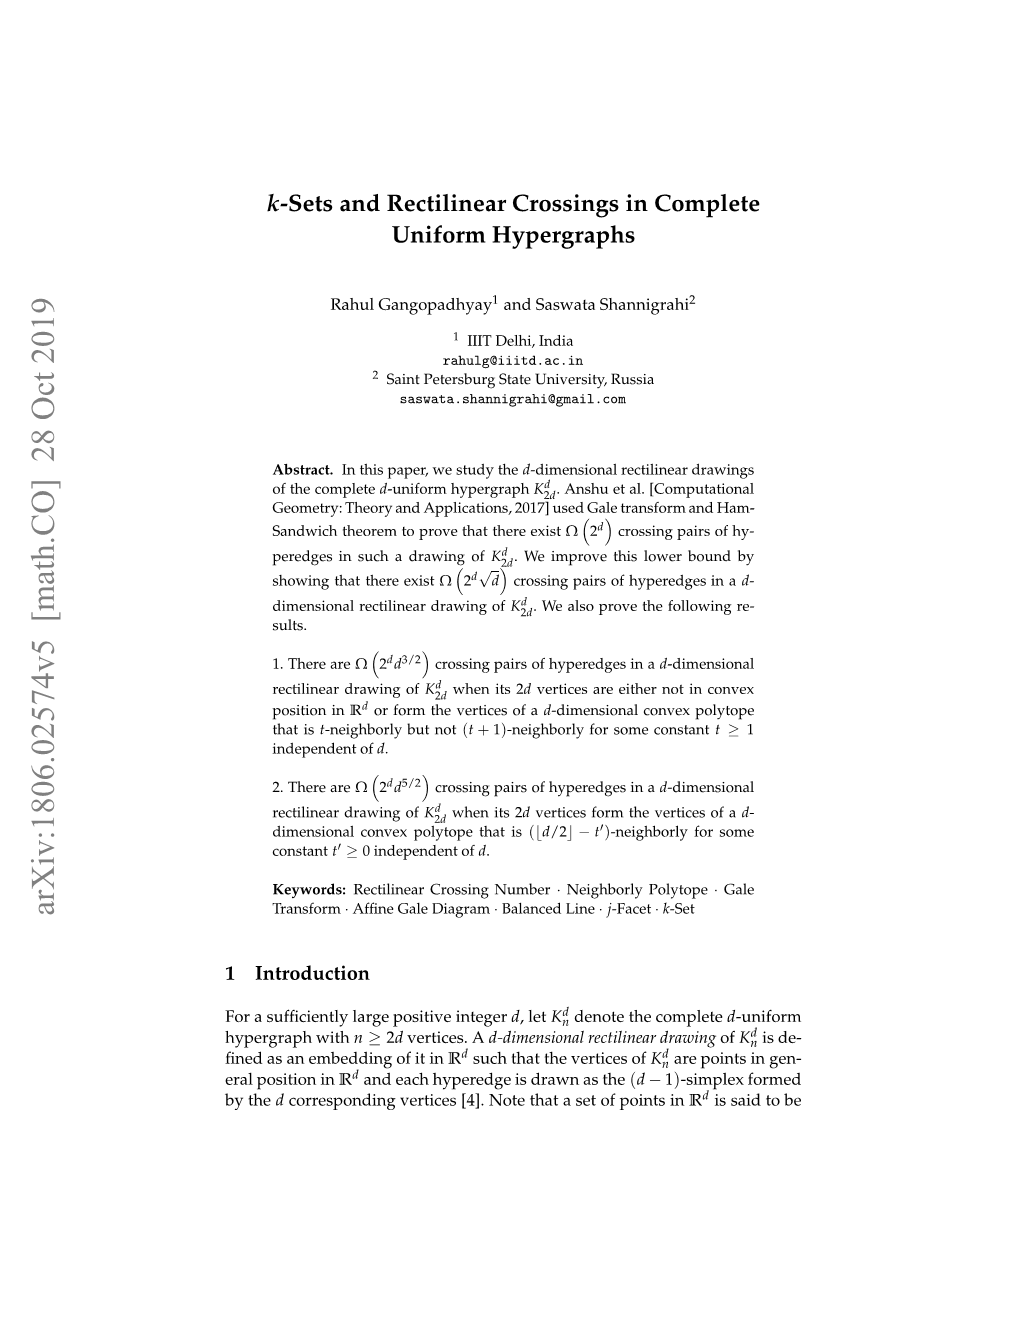 $ K $-Sets and Rectilinear Crossings in Complete Uniform Hypergraphs